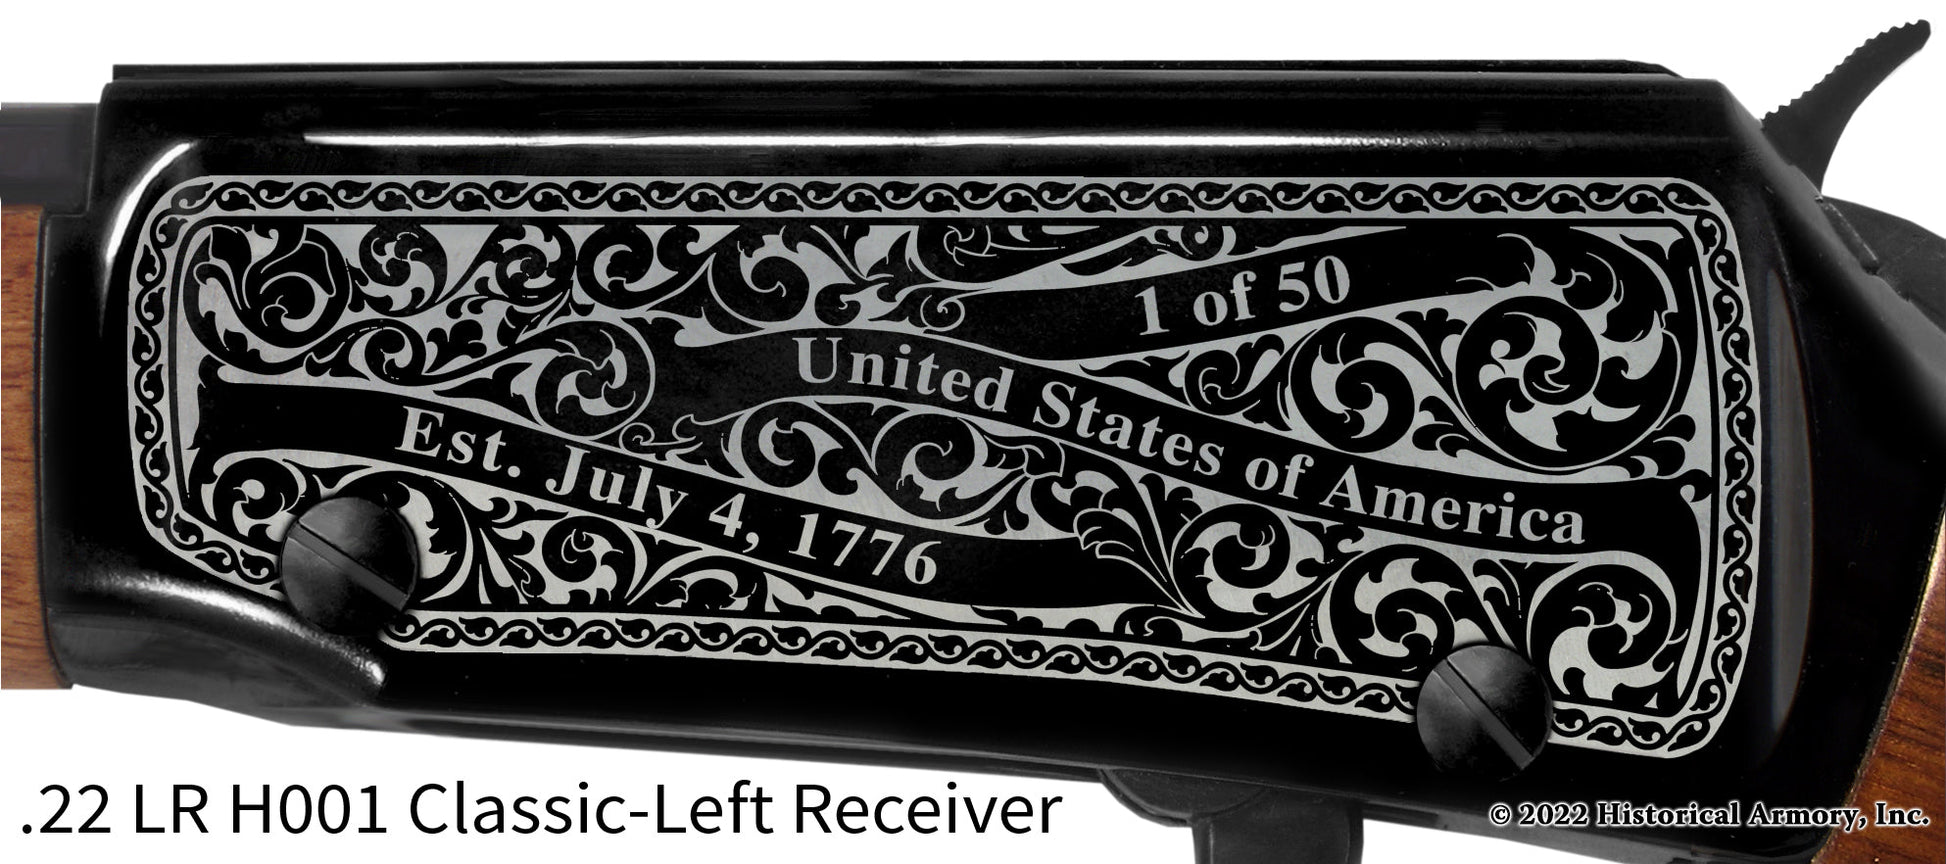 Laurel County Kentucky Engraved Henry H001 Rifle